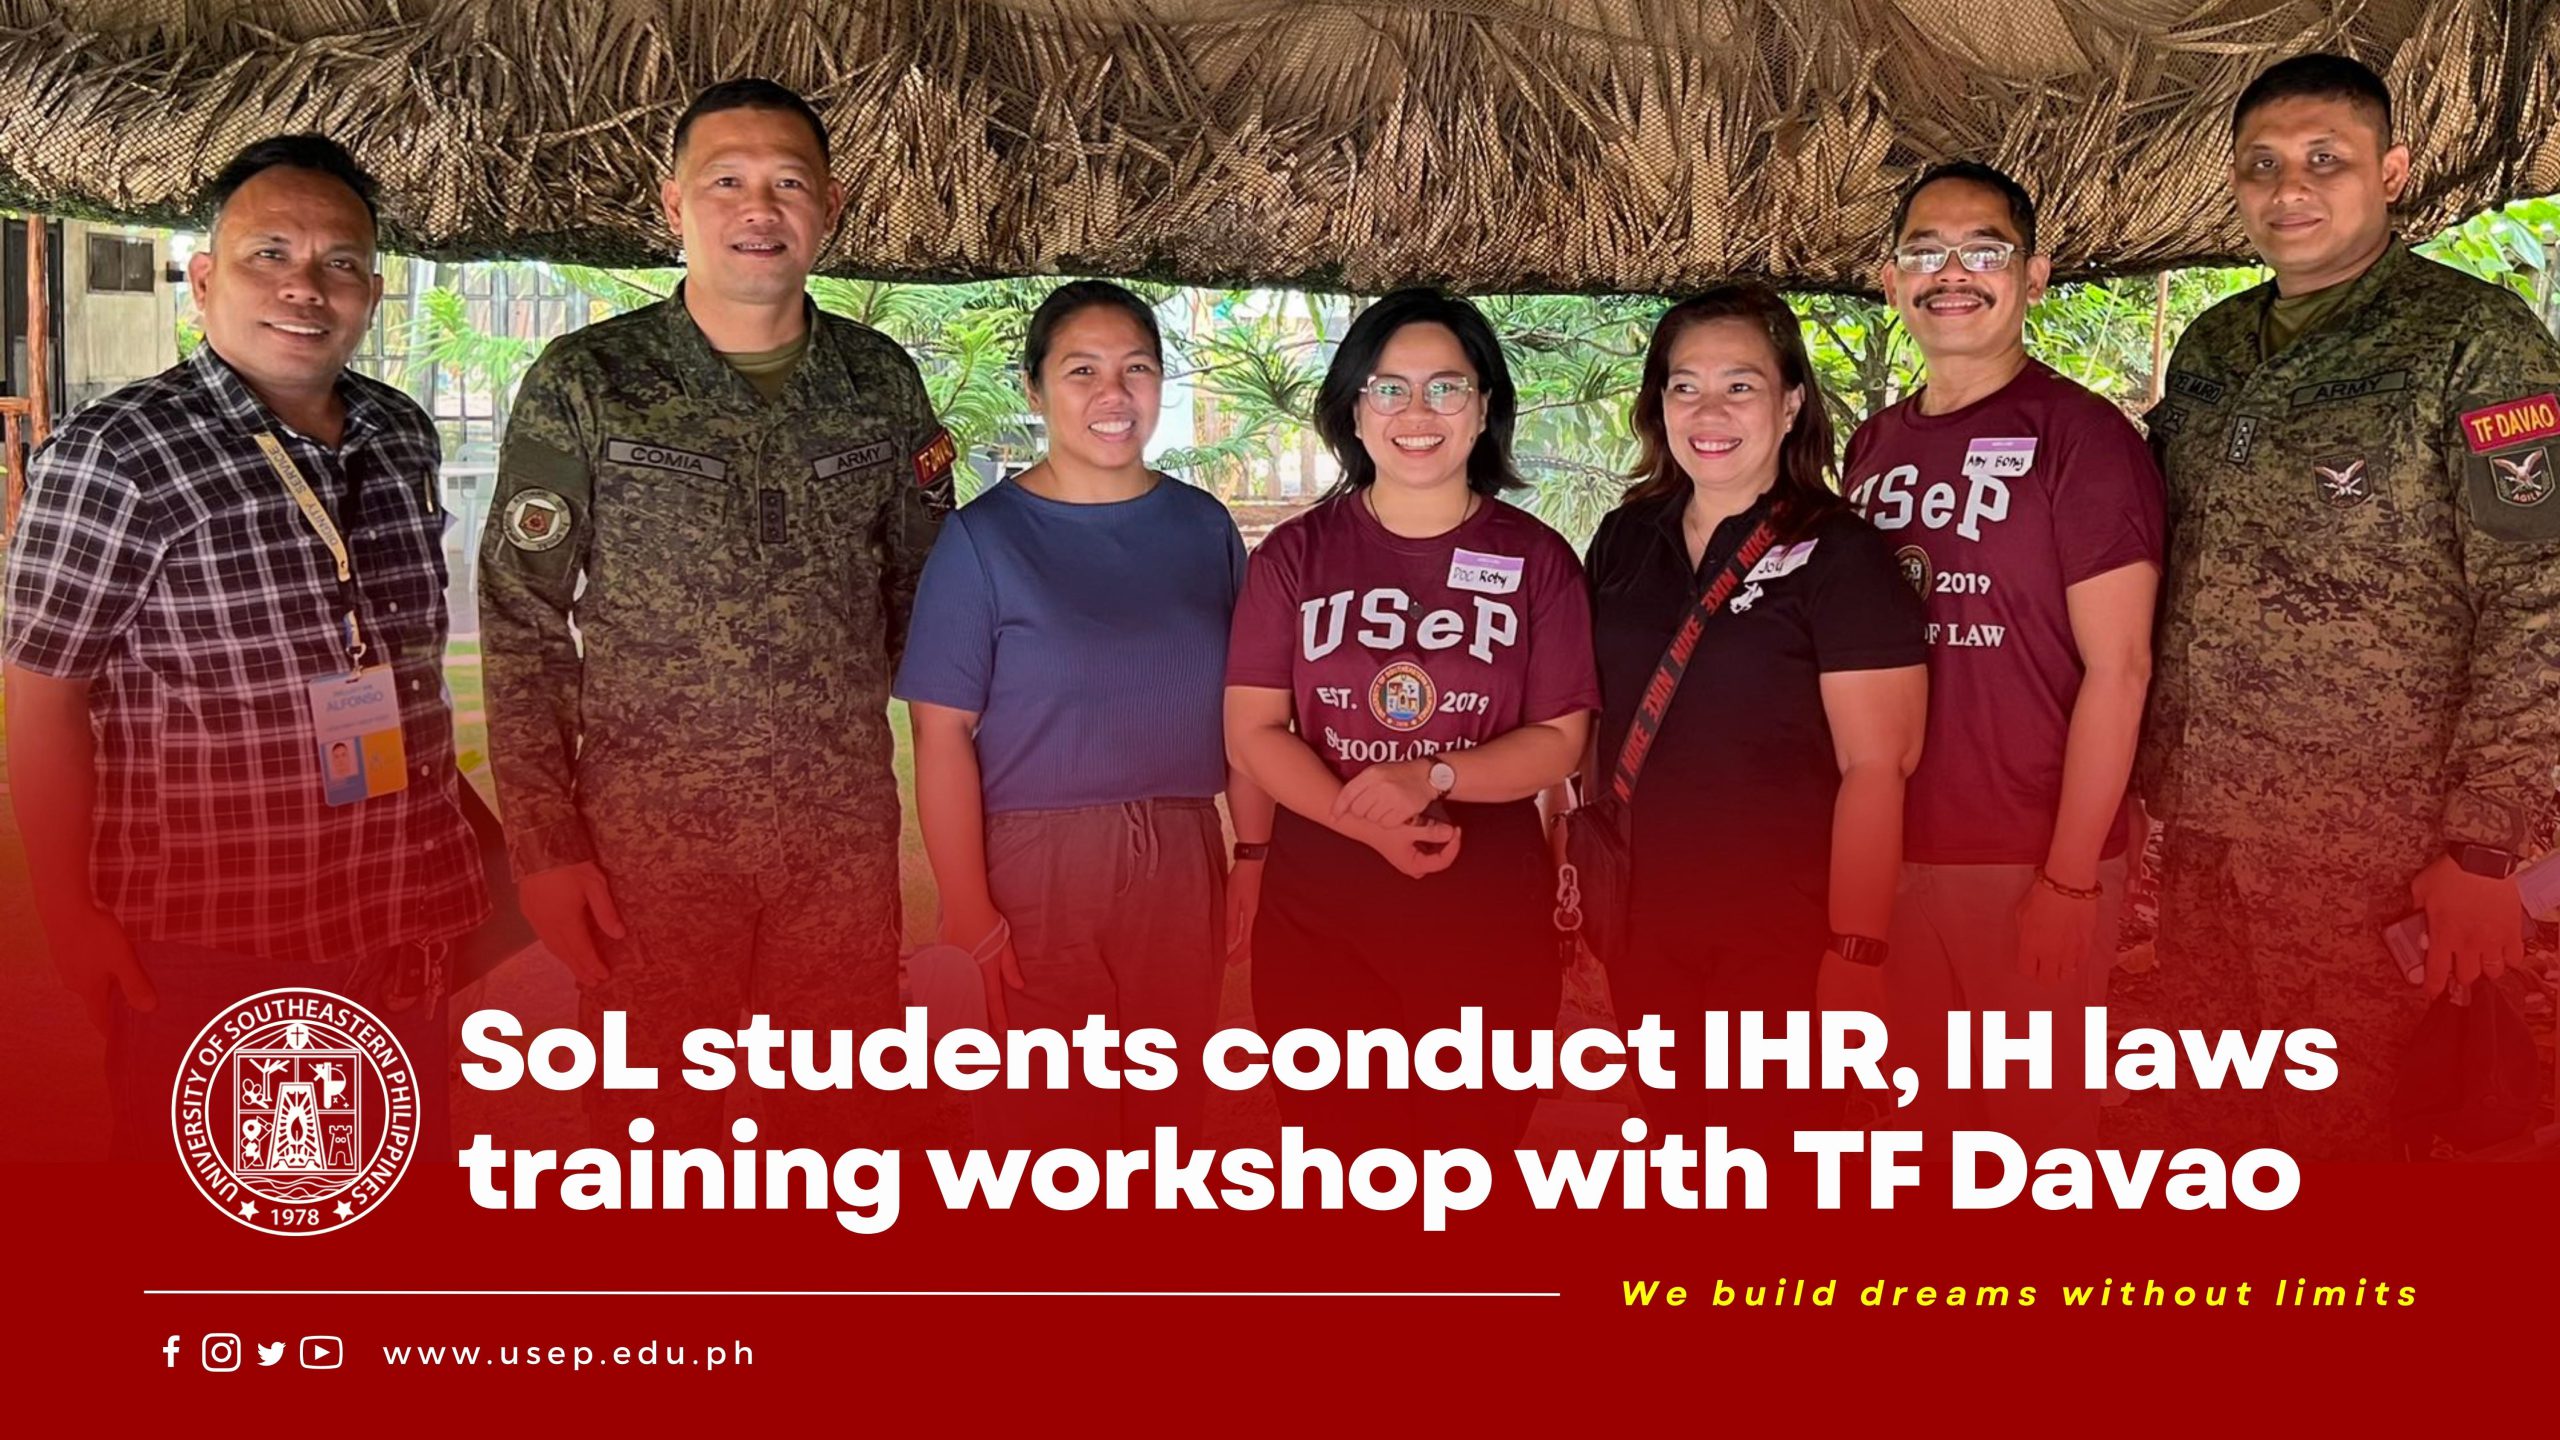 SoL students conduct IHR, IH laws training workshop with TF Davao